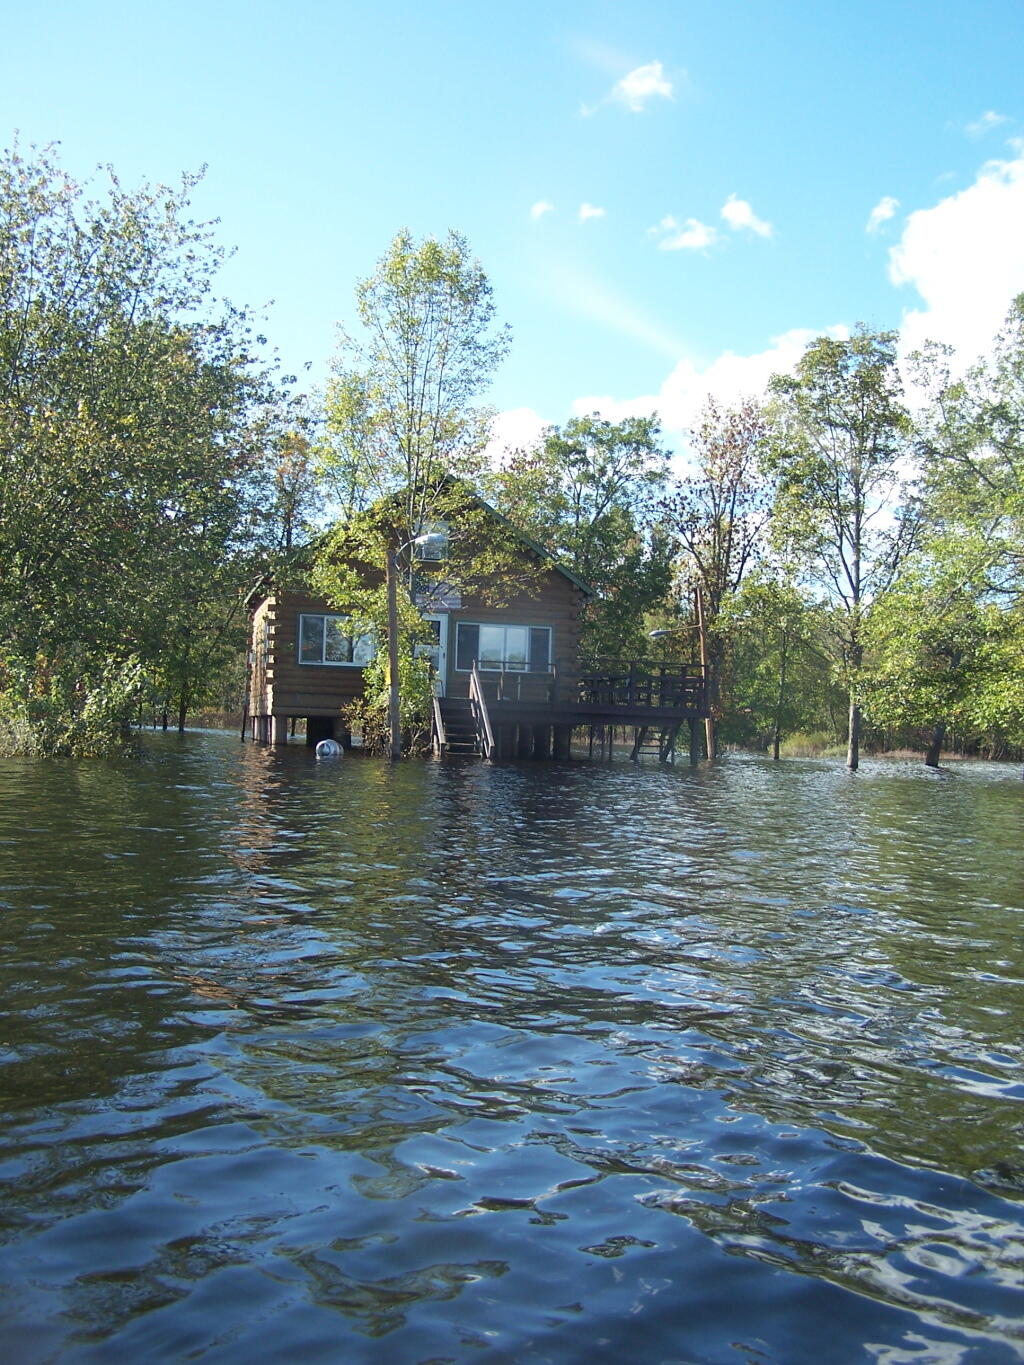 House on Stilts Surrounded By Water